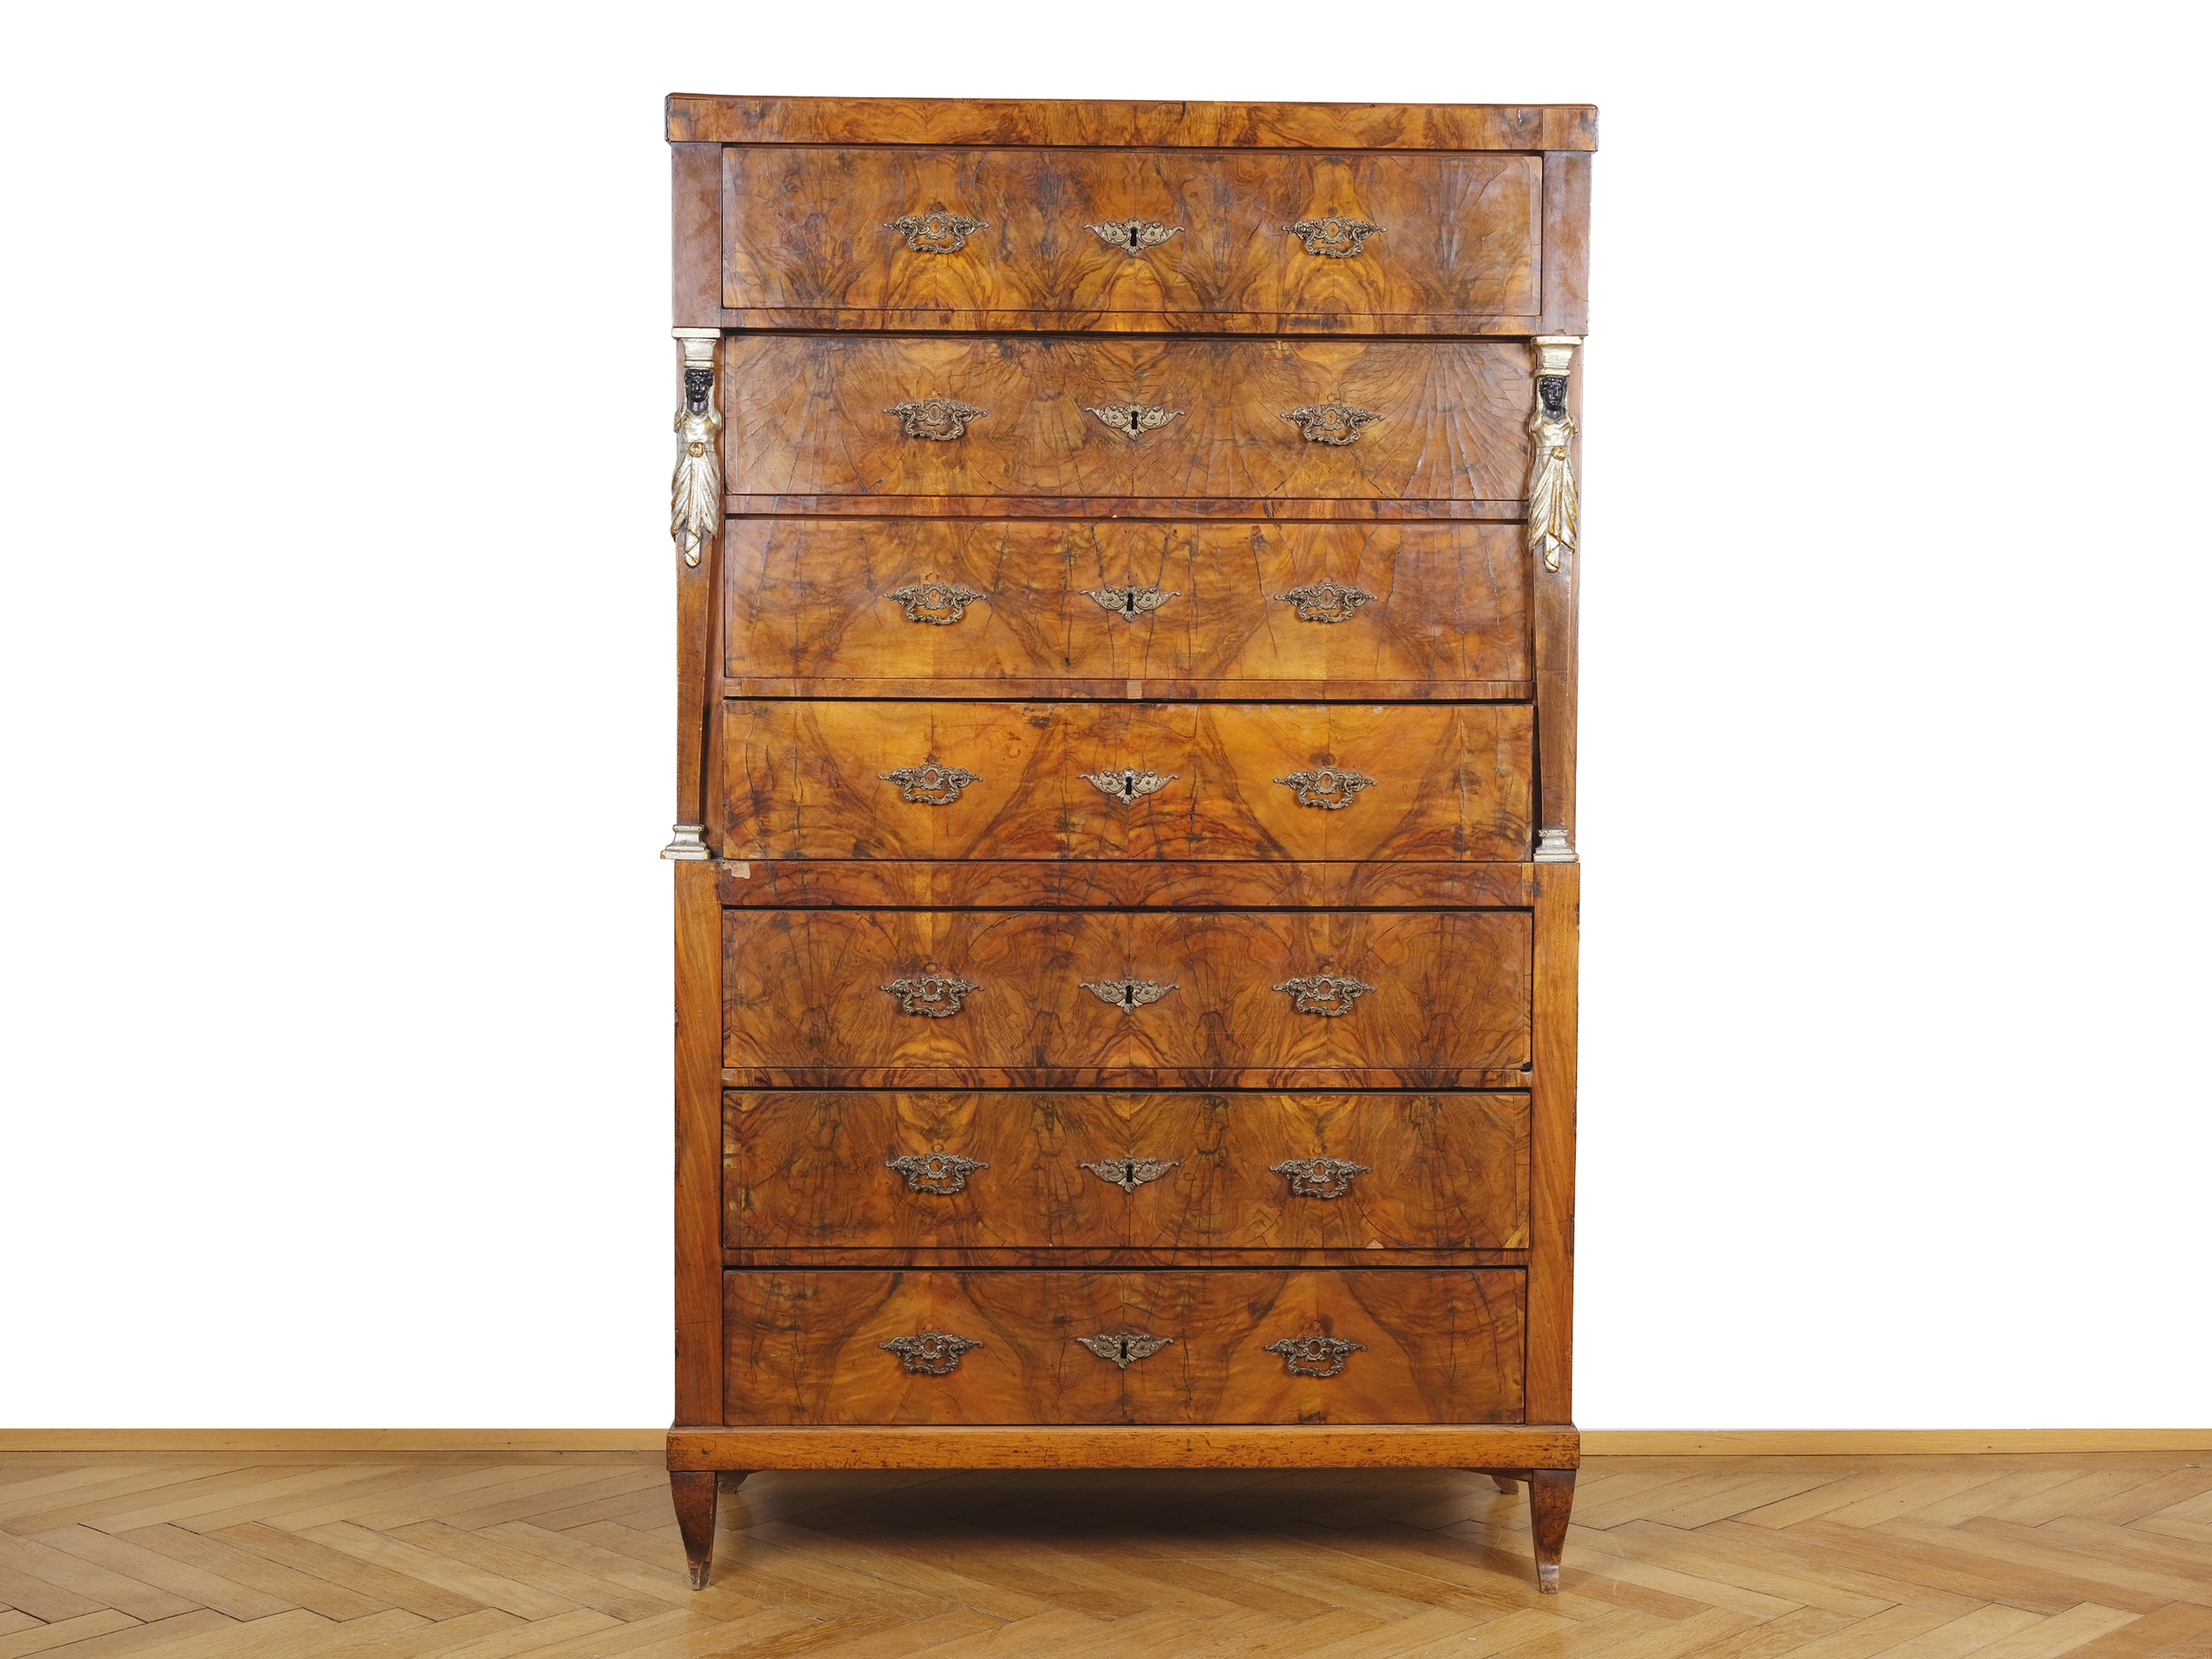 Empire chest of drawers with two side caryatids, 7 drawers, Danube Monarchy, around 1820/30